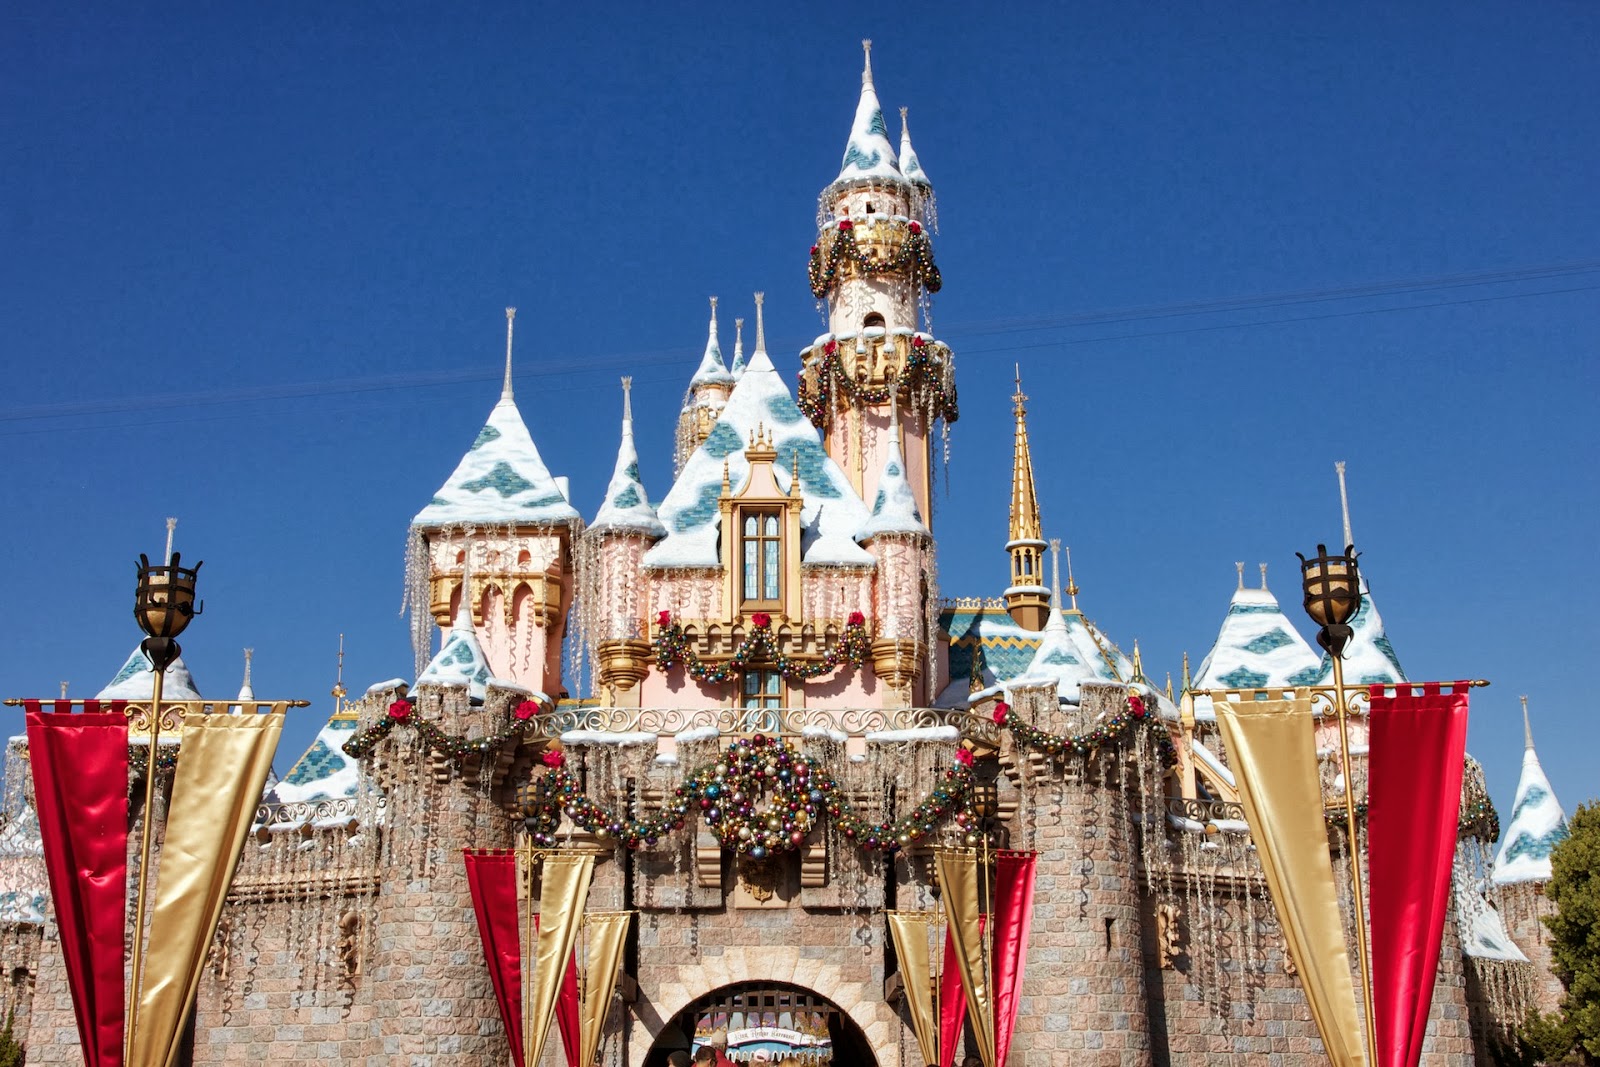  disney castle christmas wallpaper iphone wallpapers Car Pictures